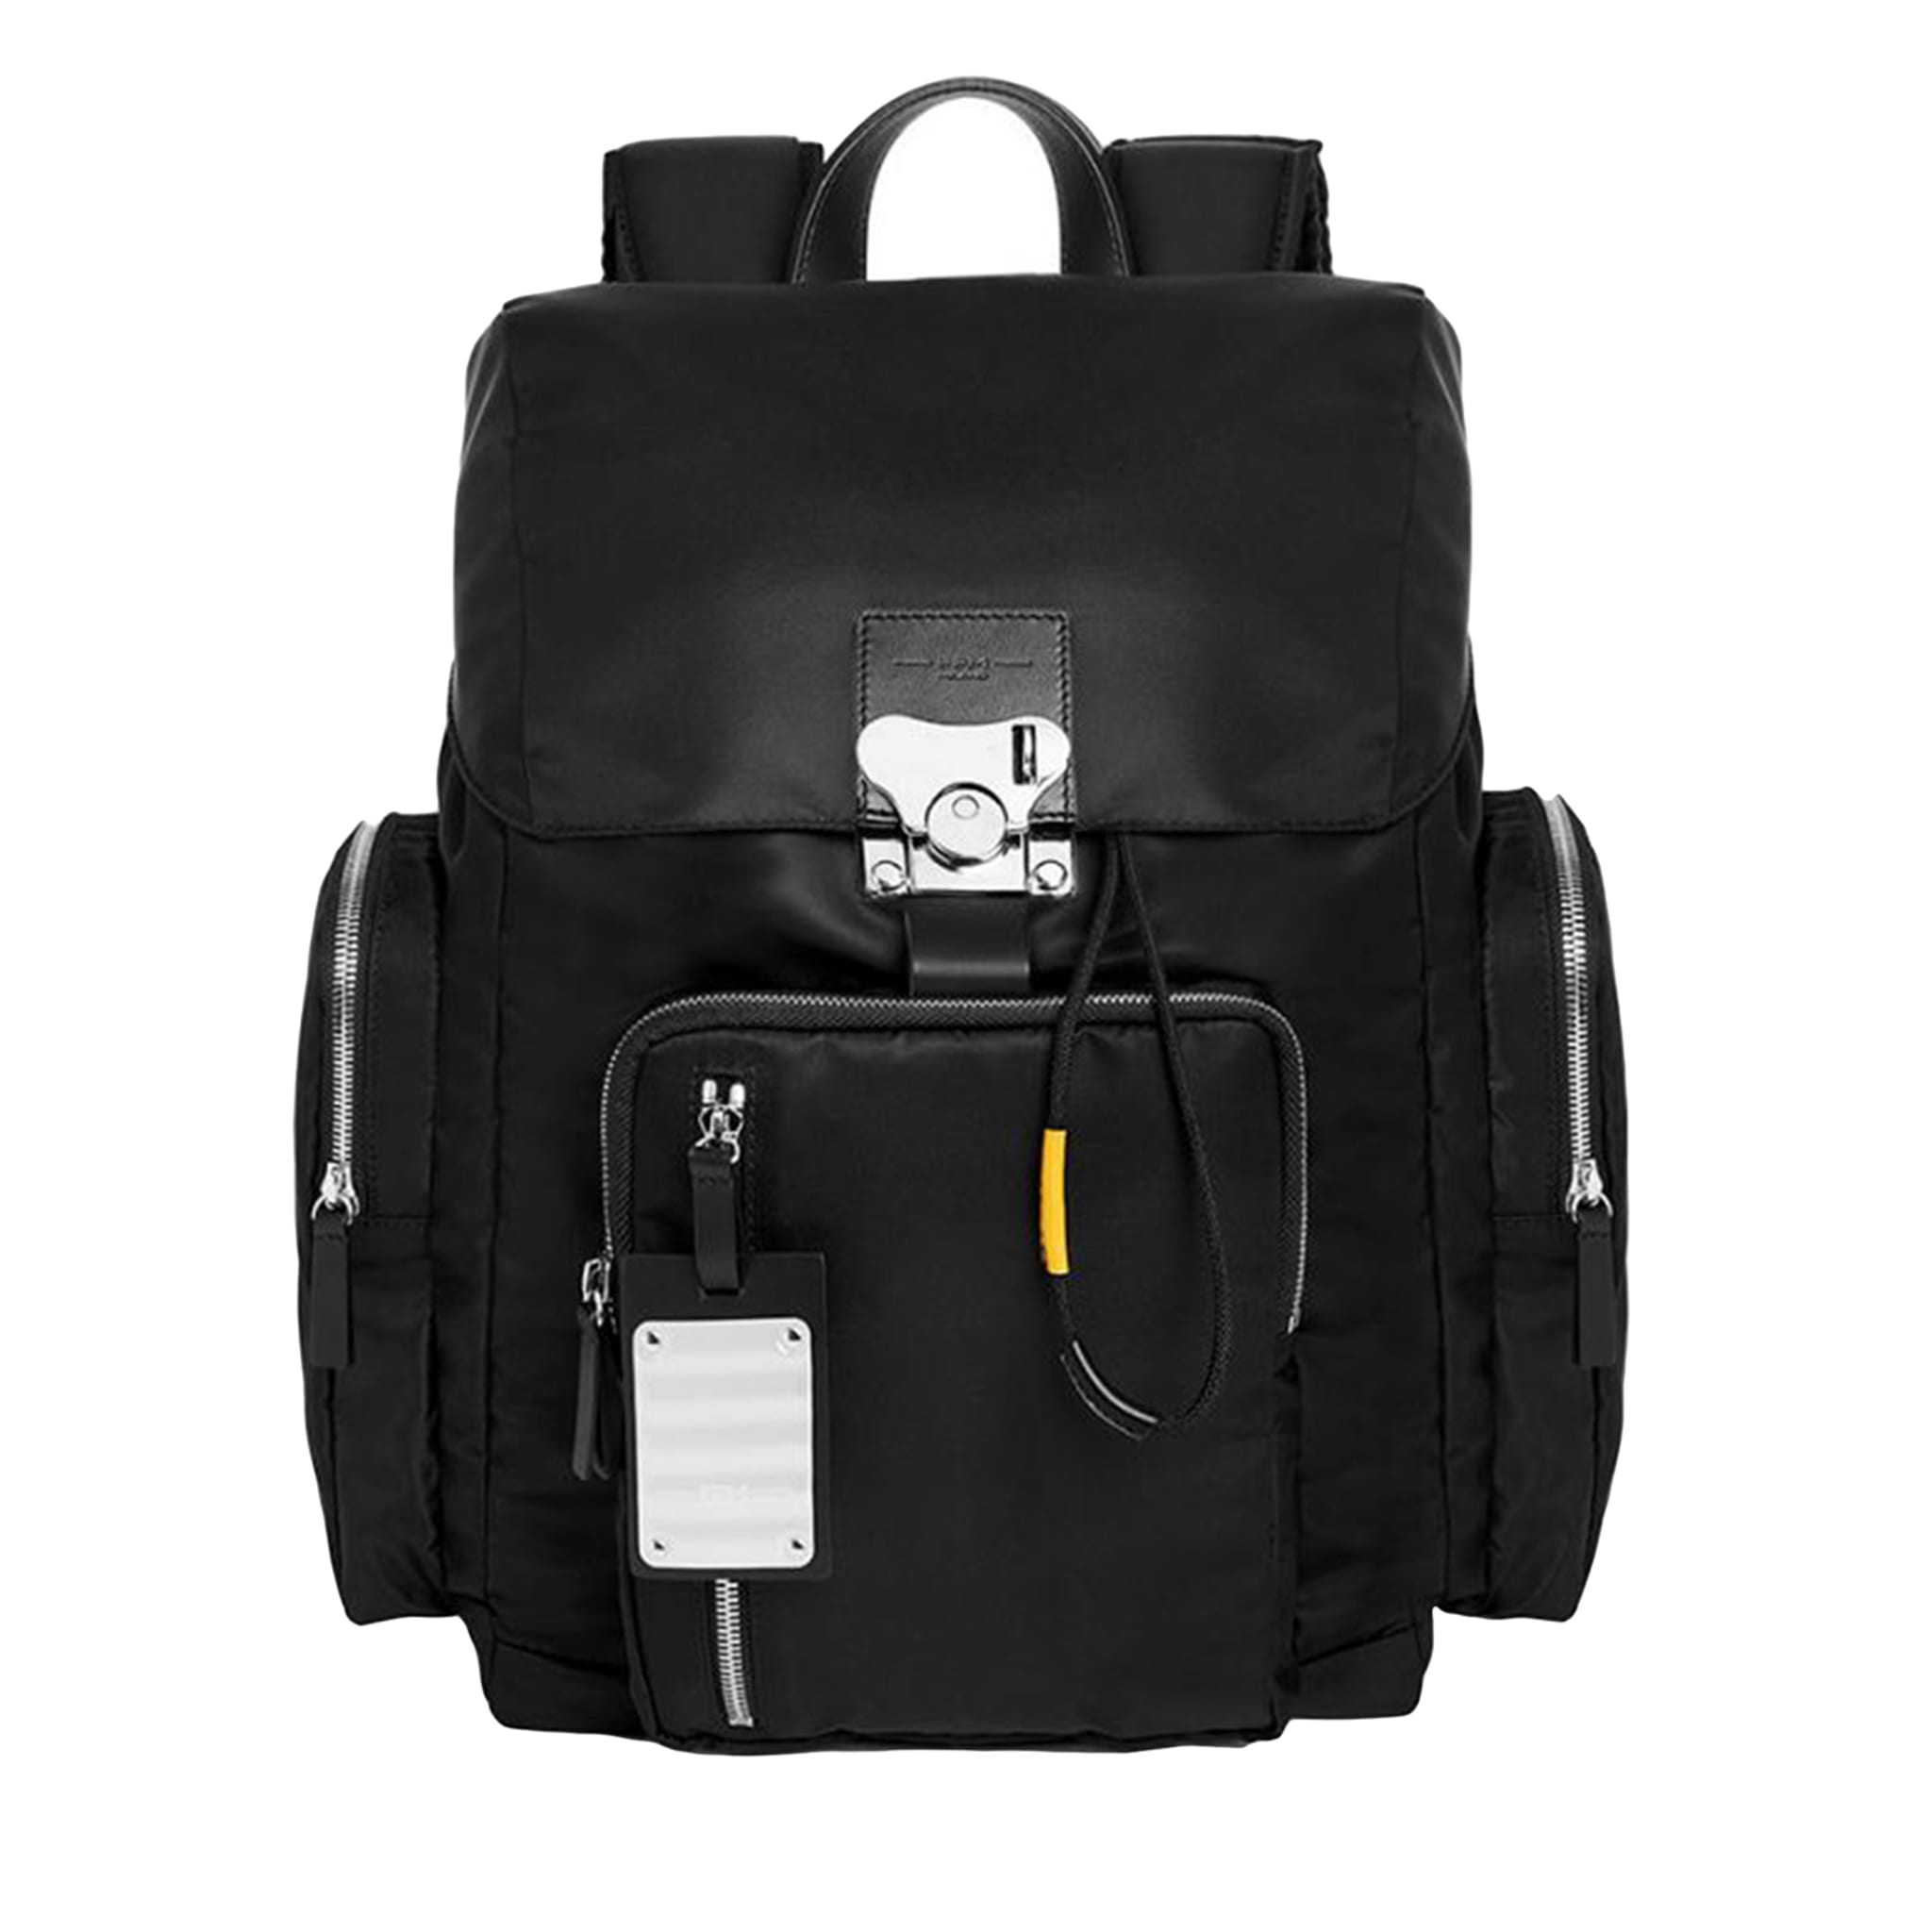 Butterfly Medium Black PC Backpack - Main view